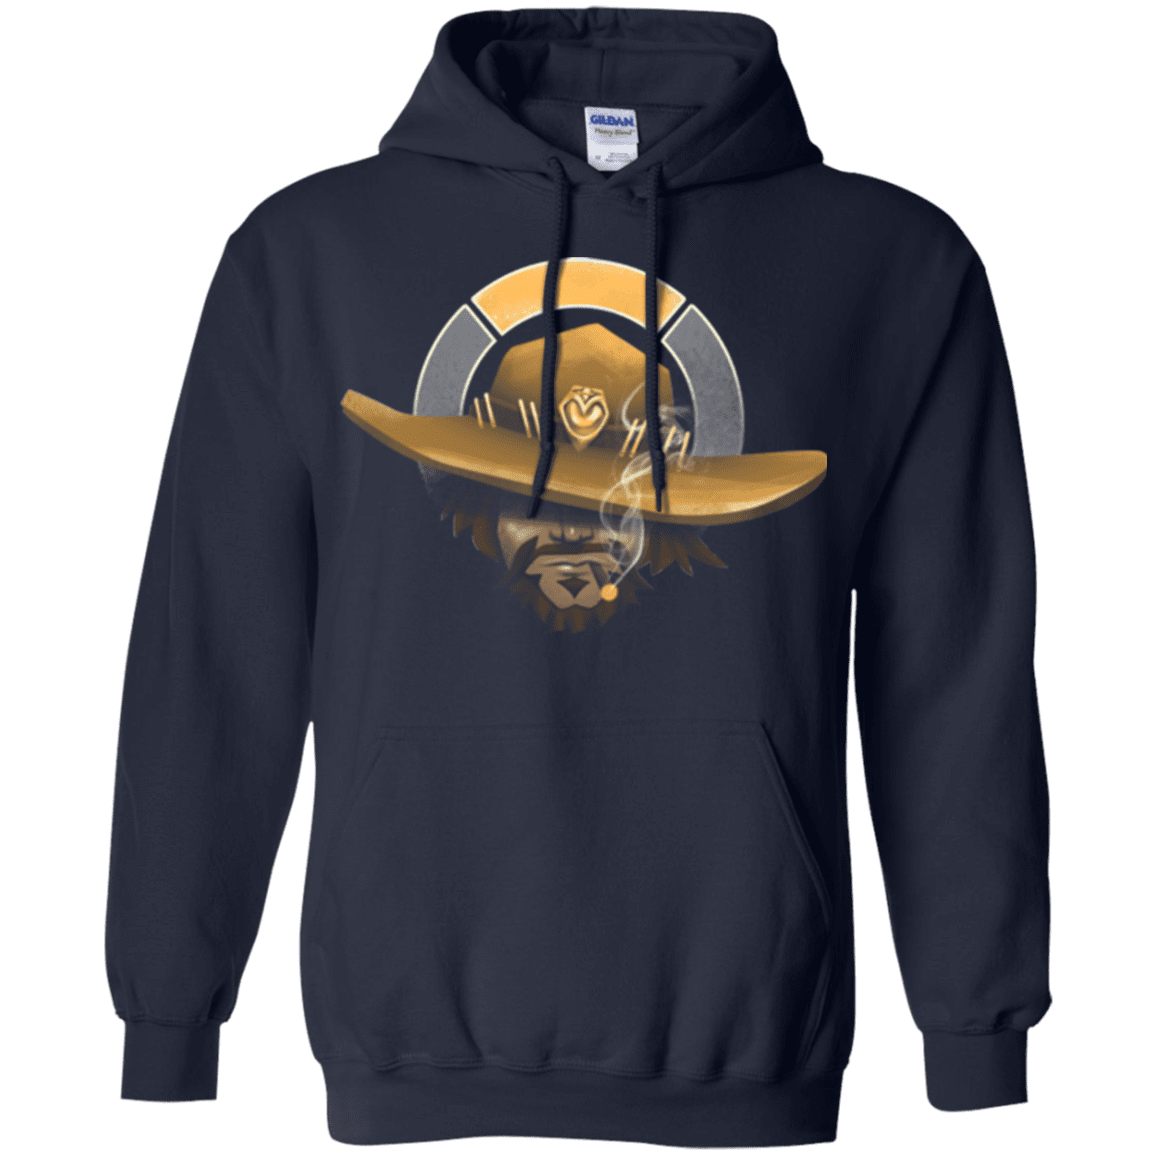 Sweatshirts Navy / Small The Outlaw Pullover Hoodie